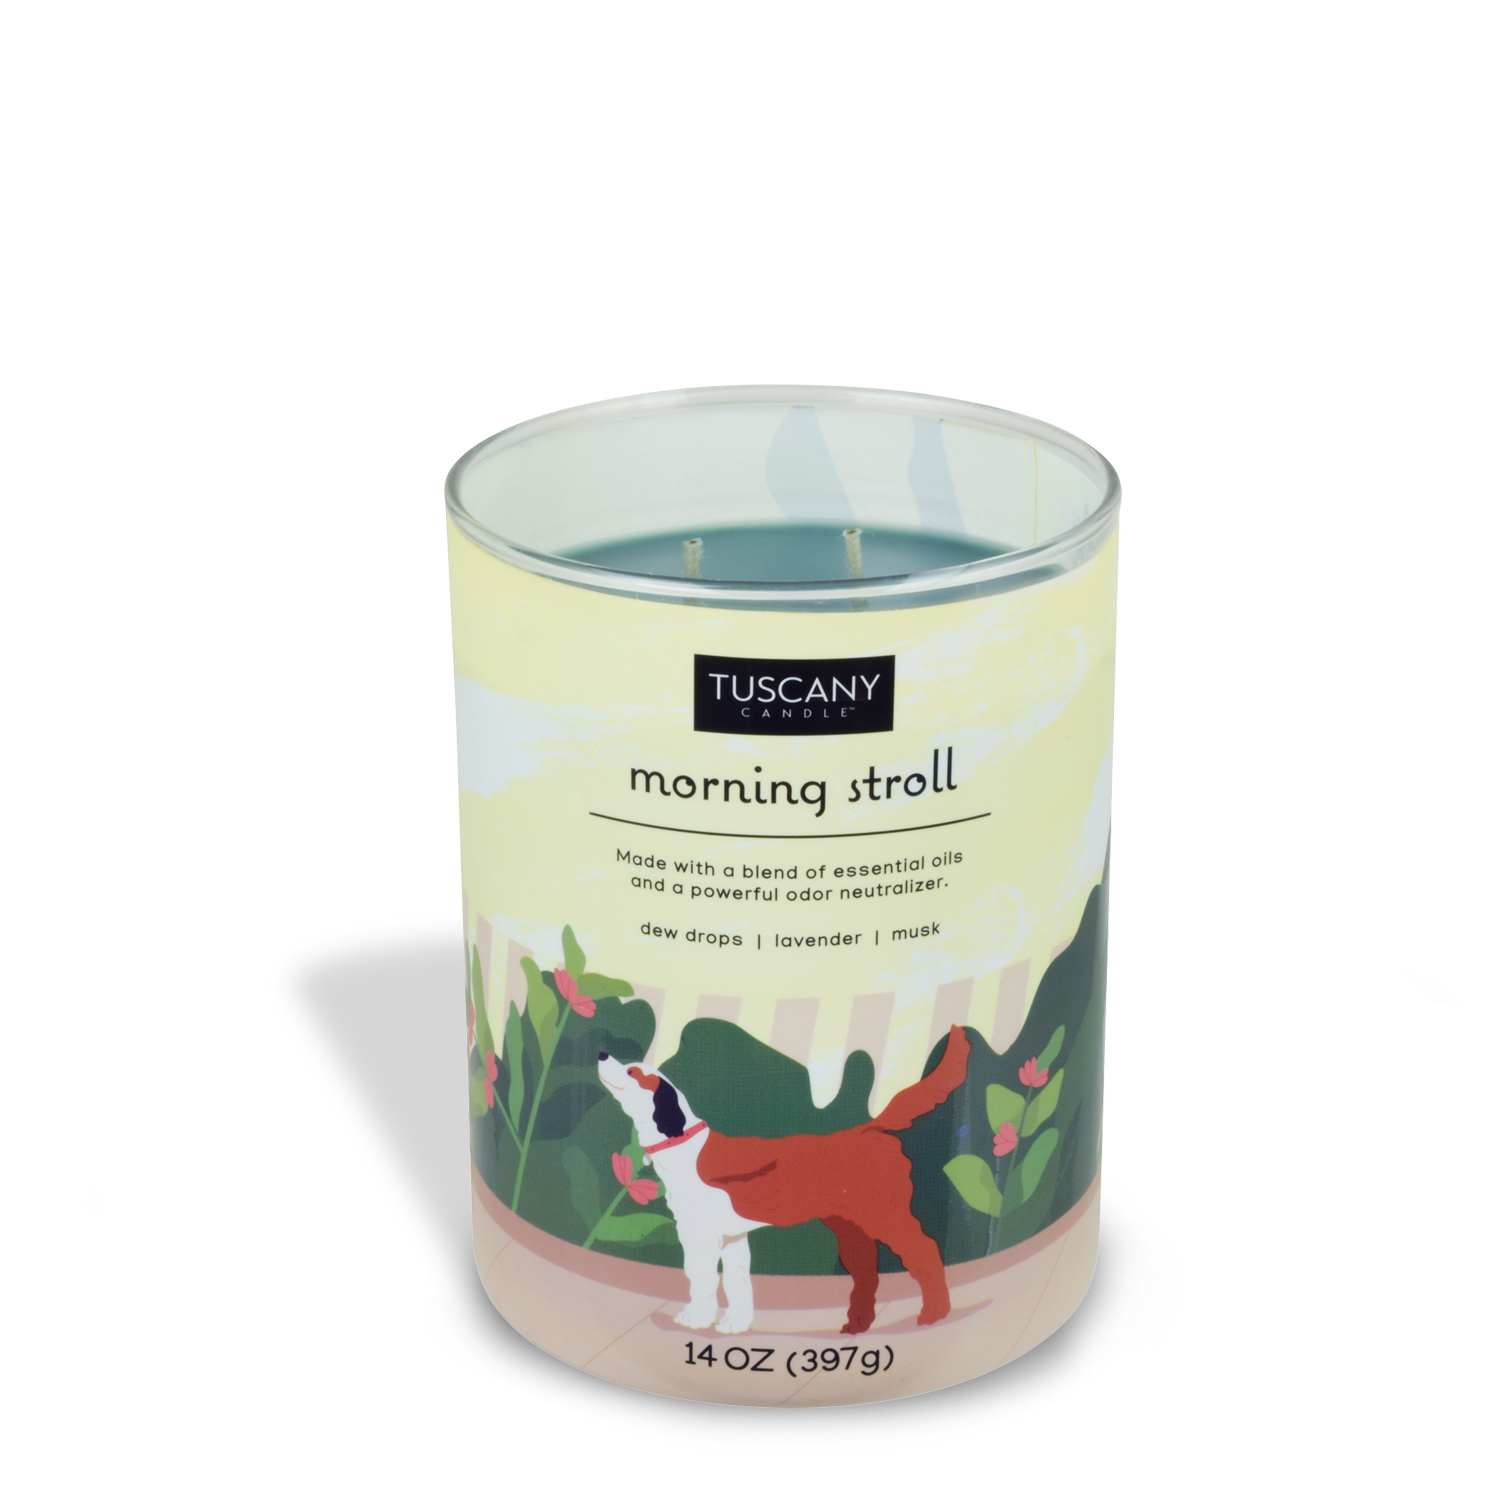 Morning Walk - Fresh Cut Grass Soy Candle – Wicks+Paws Candle Co